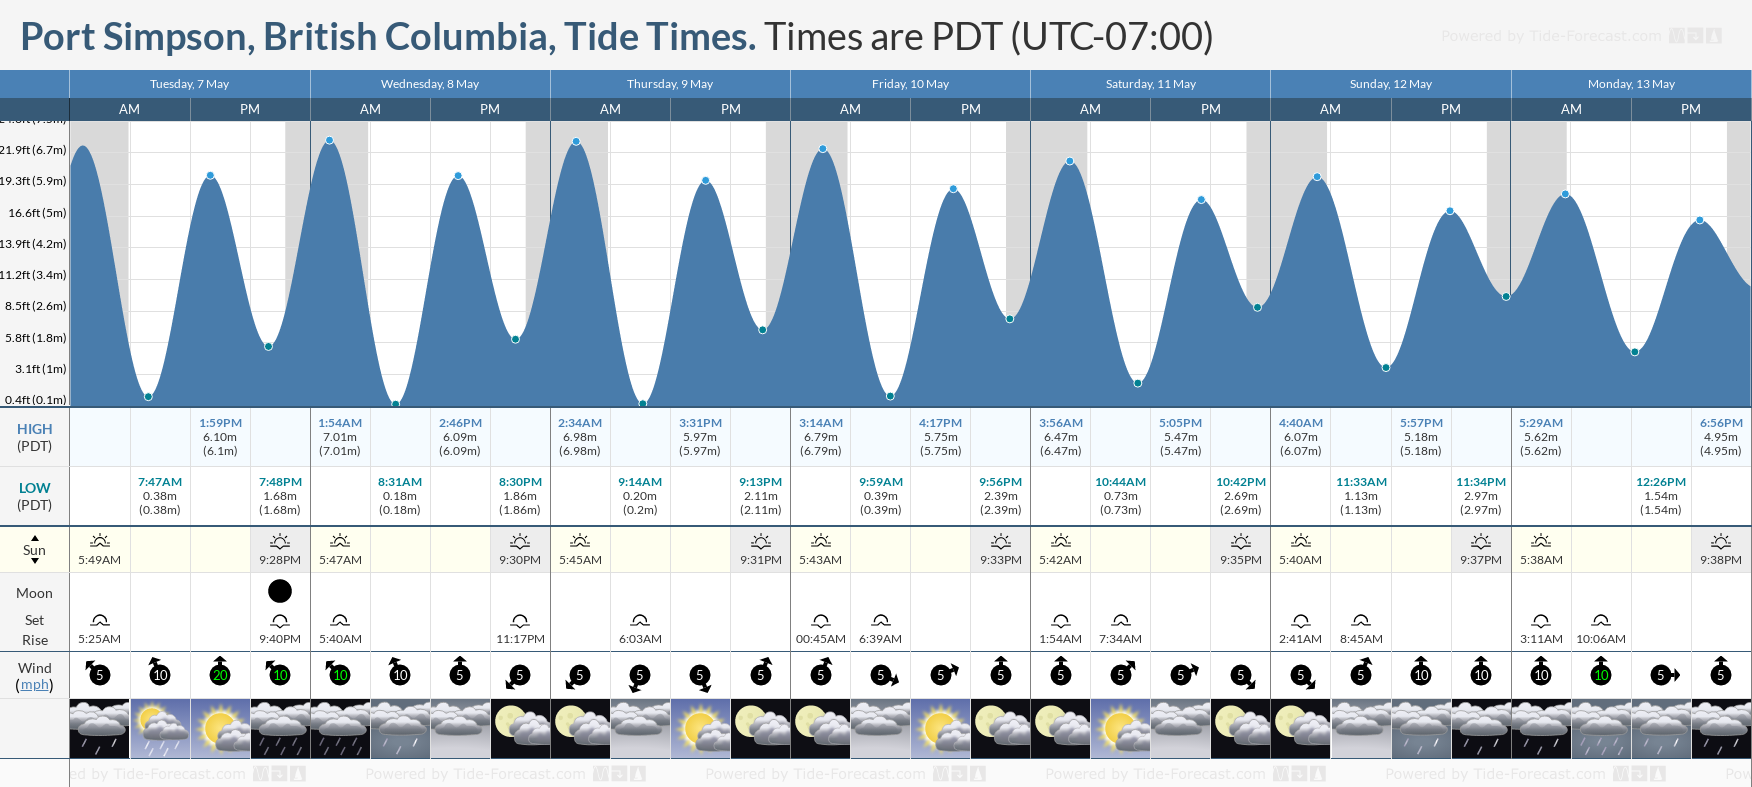 Port Simpson, British Columbia Tide Chart including high and low tide tide times for the next 7 days